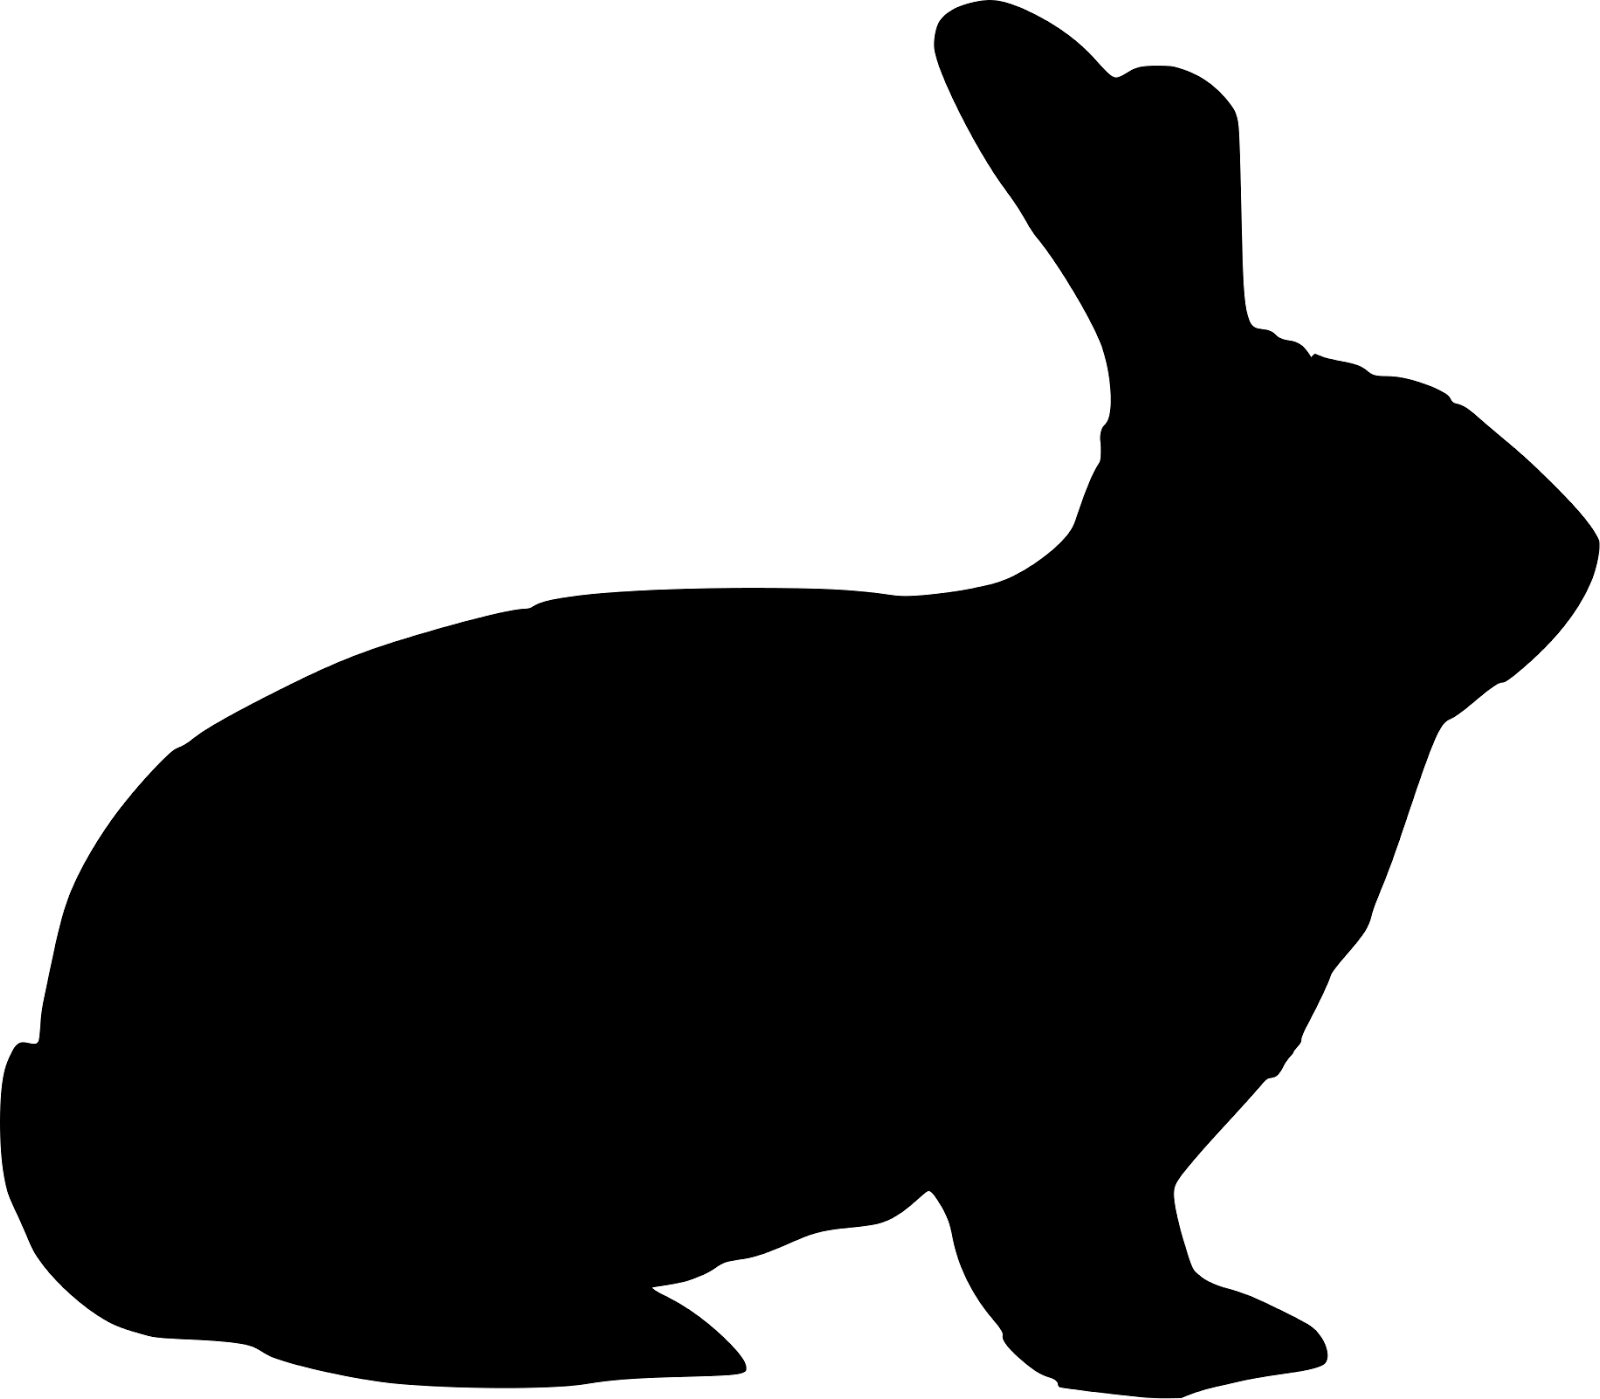 Rabbit Head Silhouette Images & Pictures - Becuo - Cliparts.co